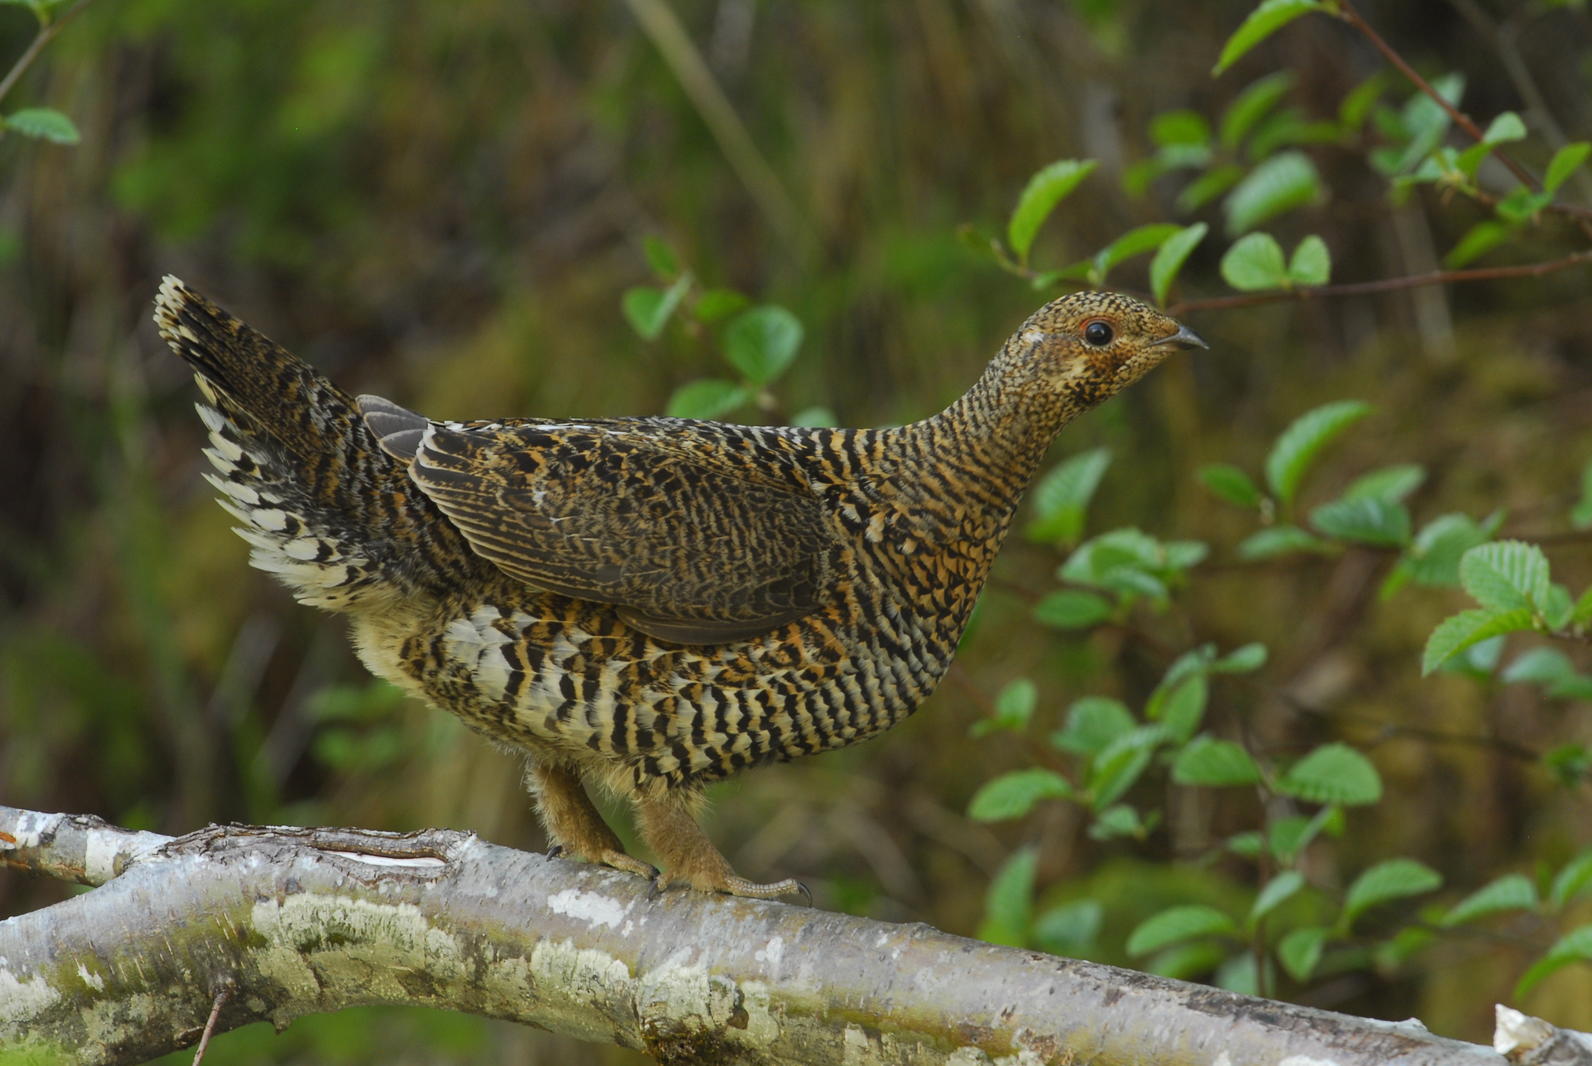 Prince of Wales Spruce Grouse is a subspecies of the Spruce Grouse found only on Prince of Wales Island in the Tongass National Forest. 